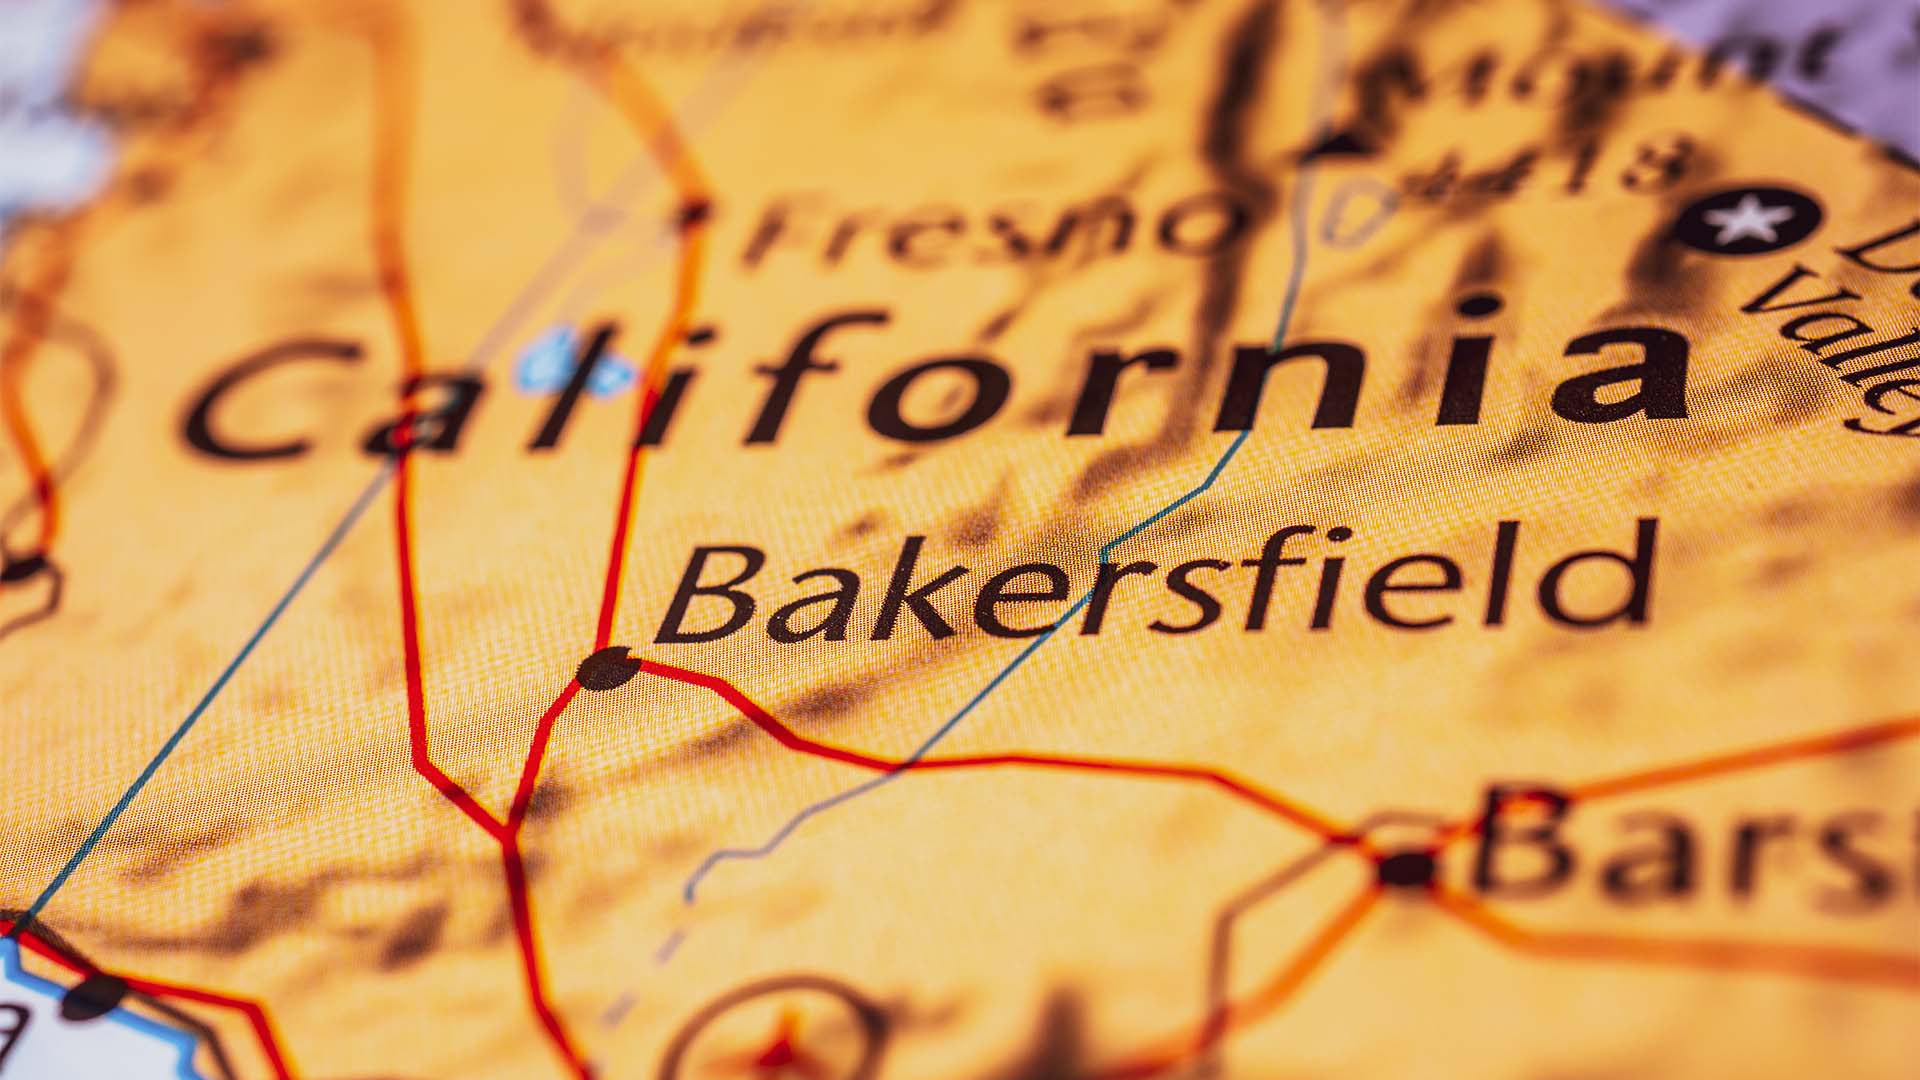 map of Bakersfield CA - we will put your business on the map in the local market, regional, statewide, or national